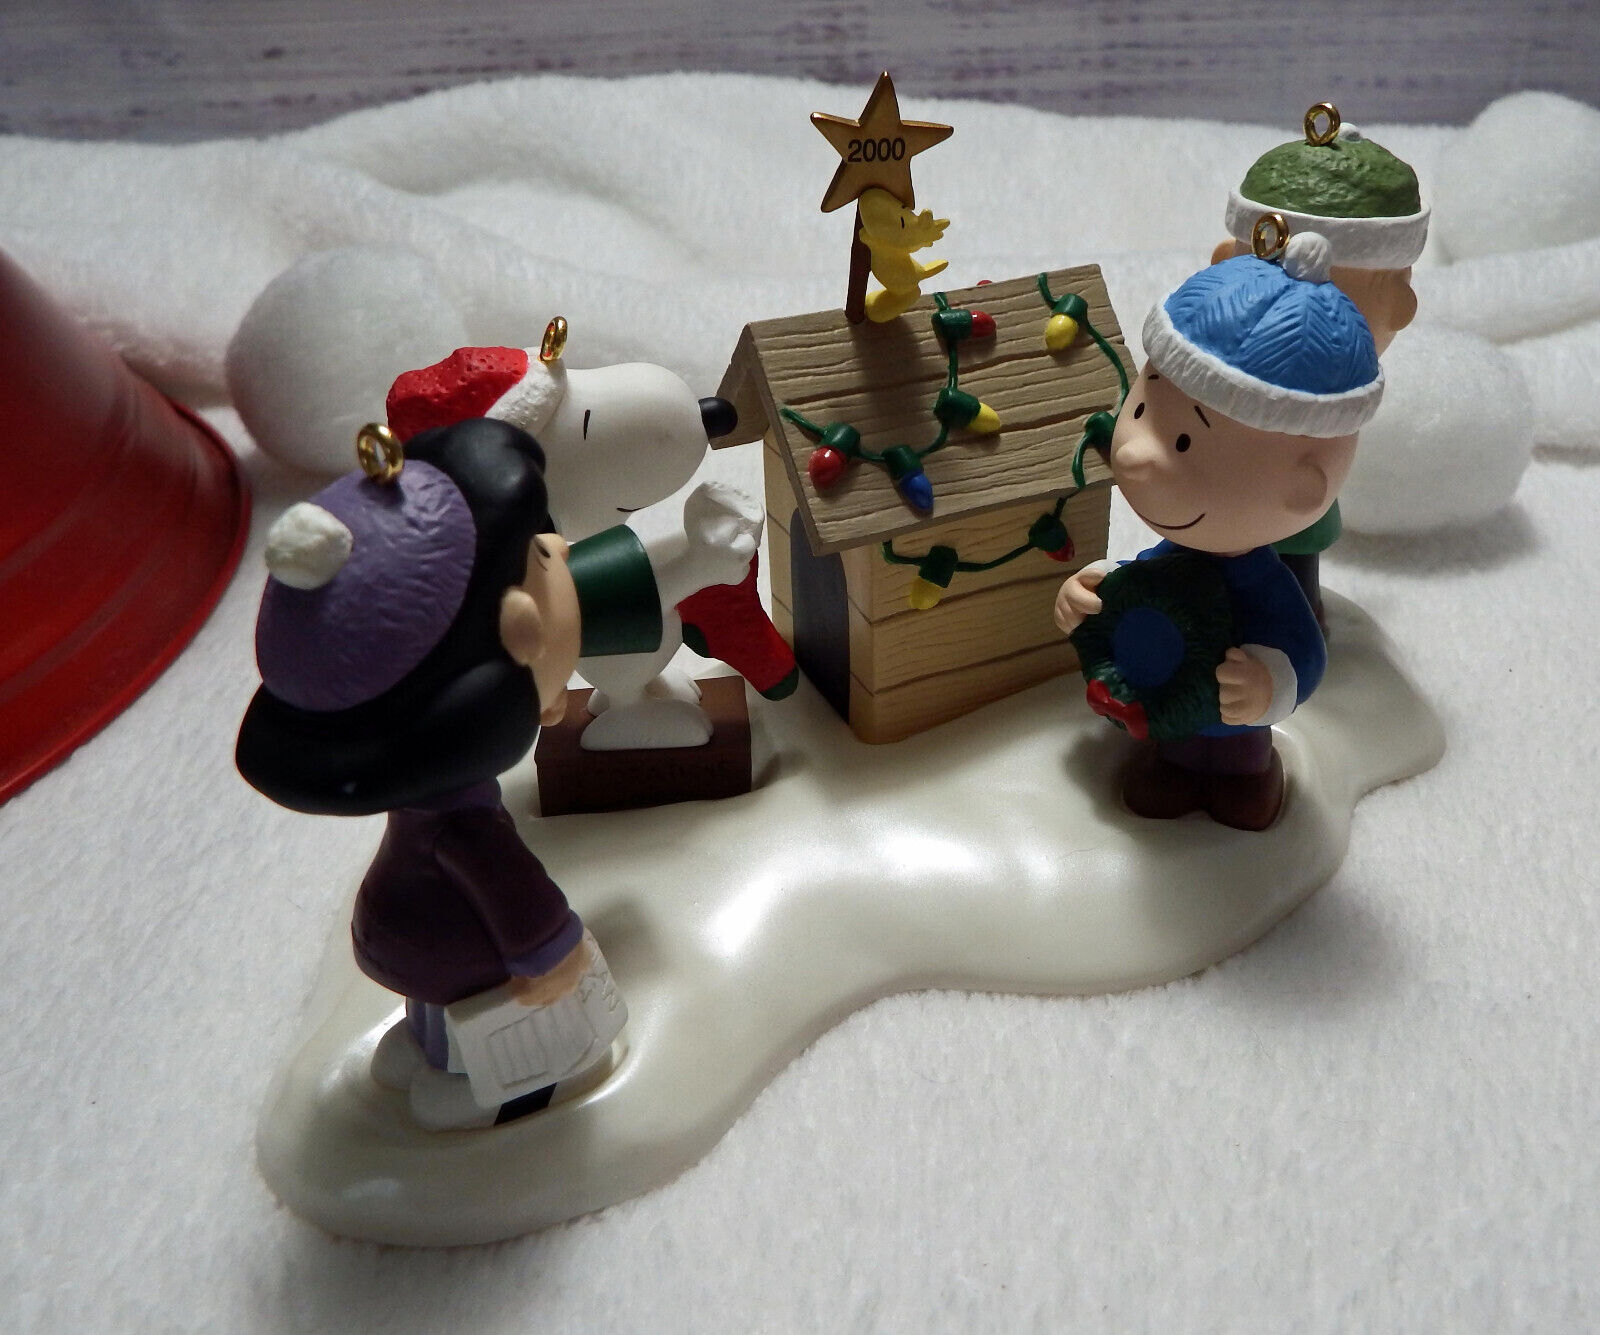 Hallmark, A Snoopy Christmas, Complete Series, dated 2000, ornaments, lot of 5